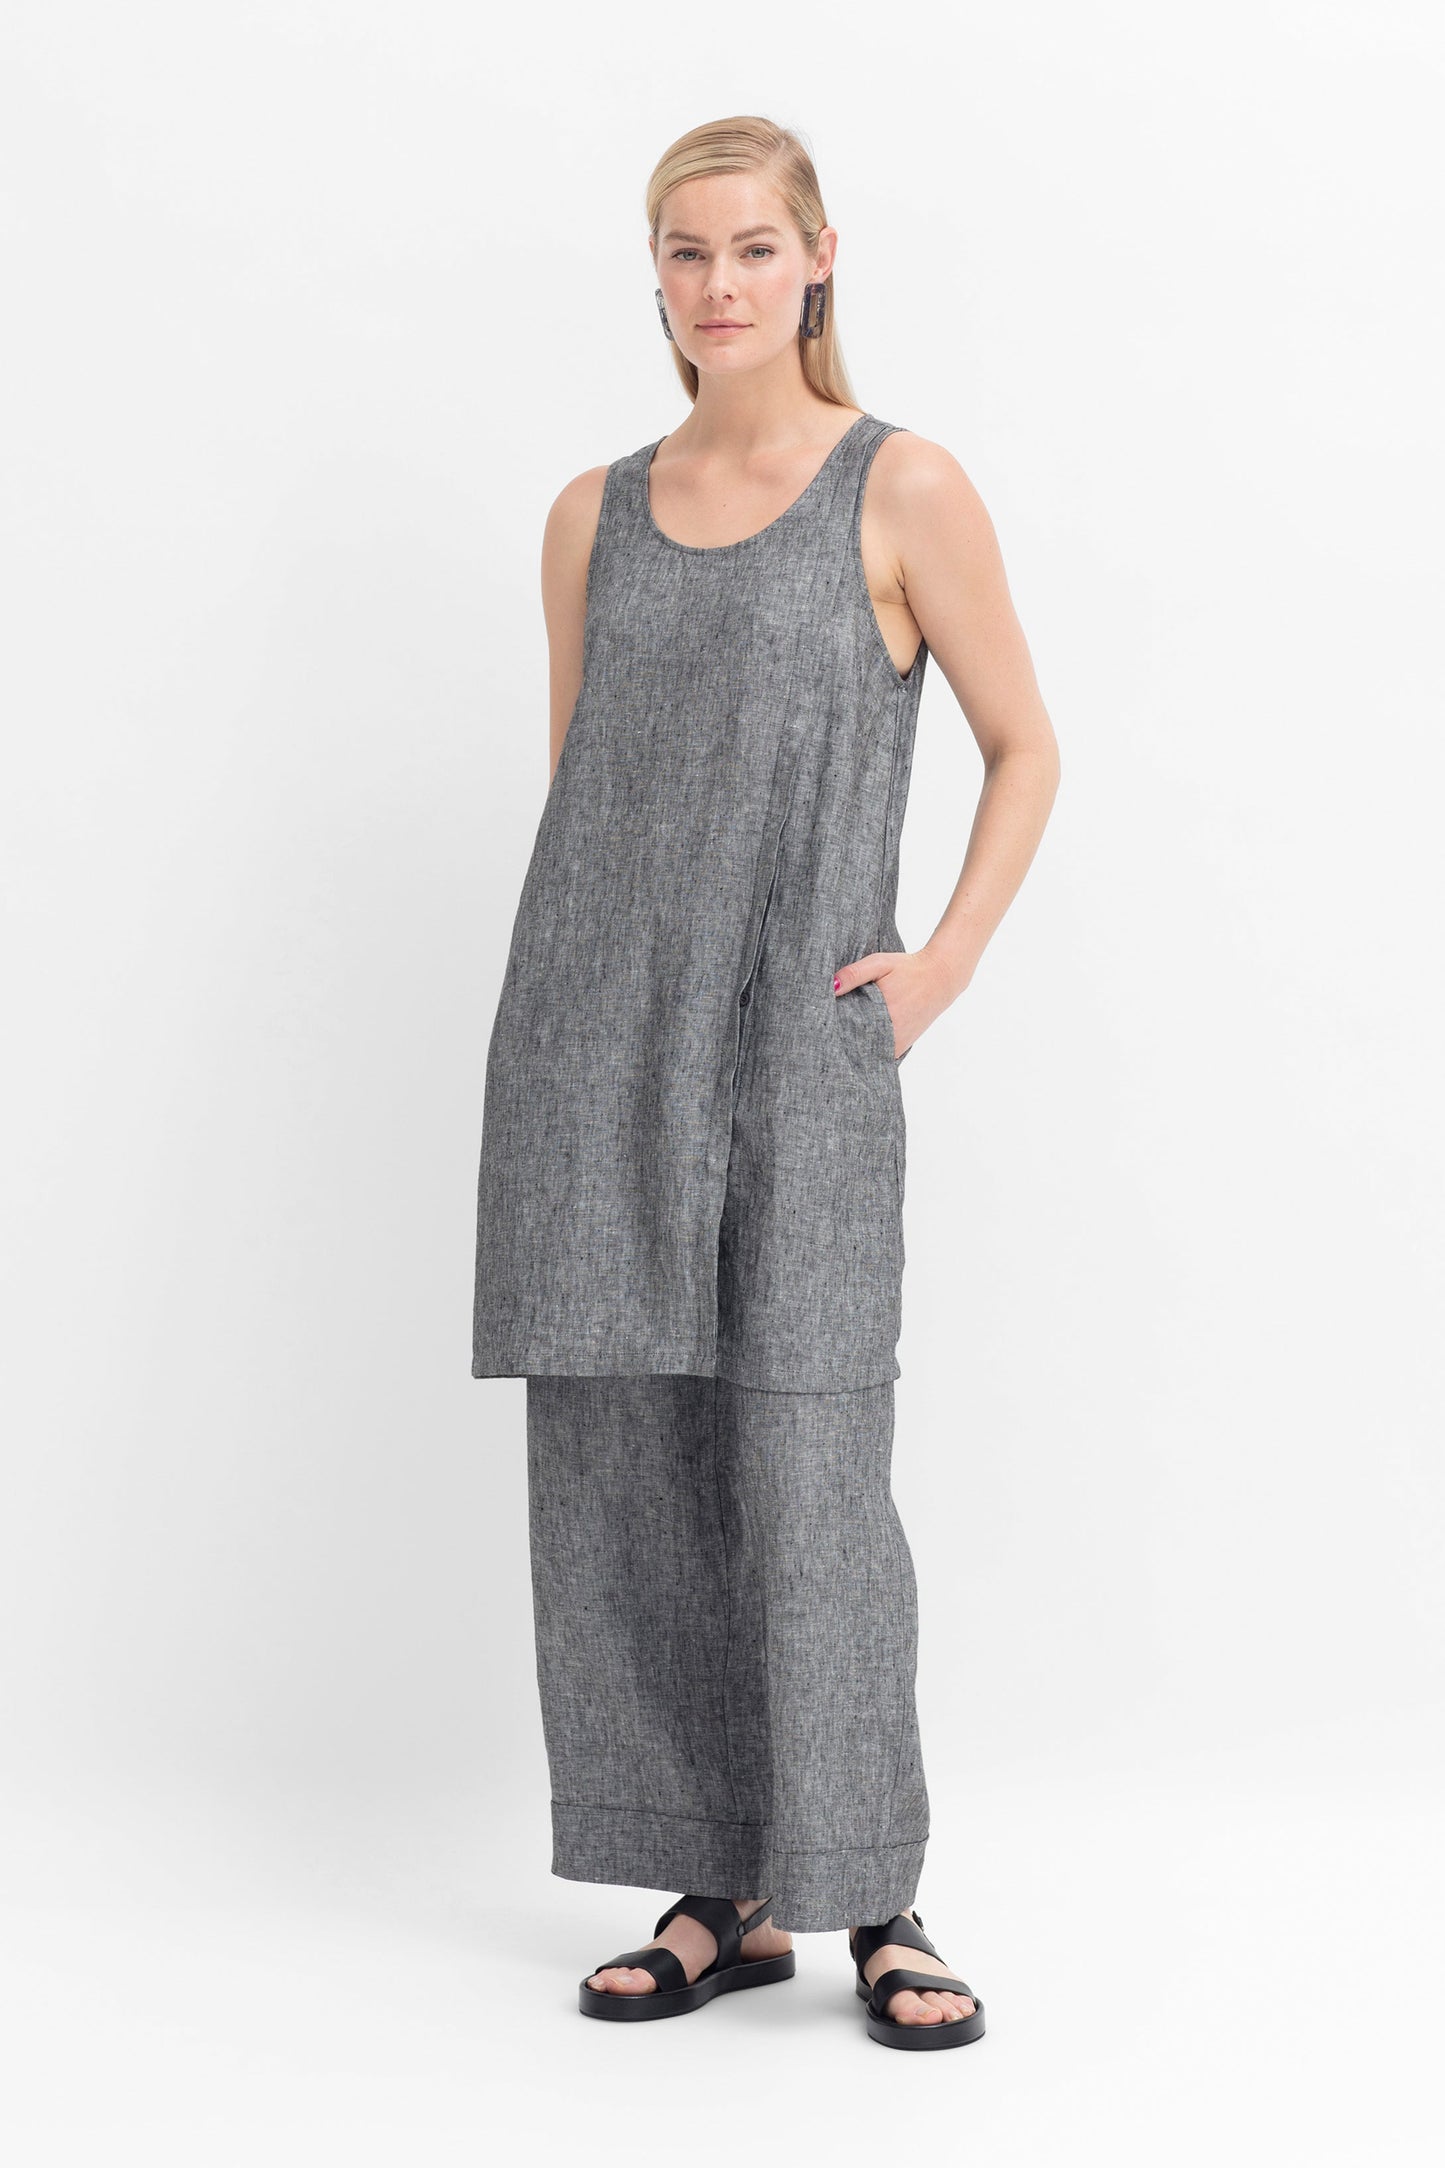 Vlek Marle French Linen Sleeveless Shift Dress Tunic Model Front With Pant | CHARCOAL TWO TONE